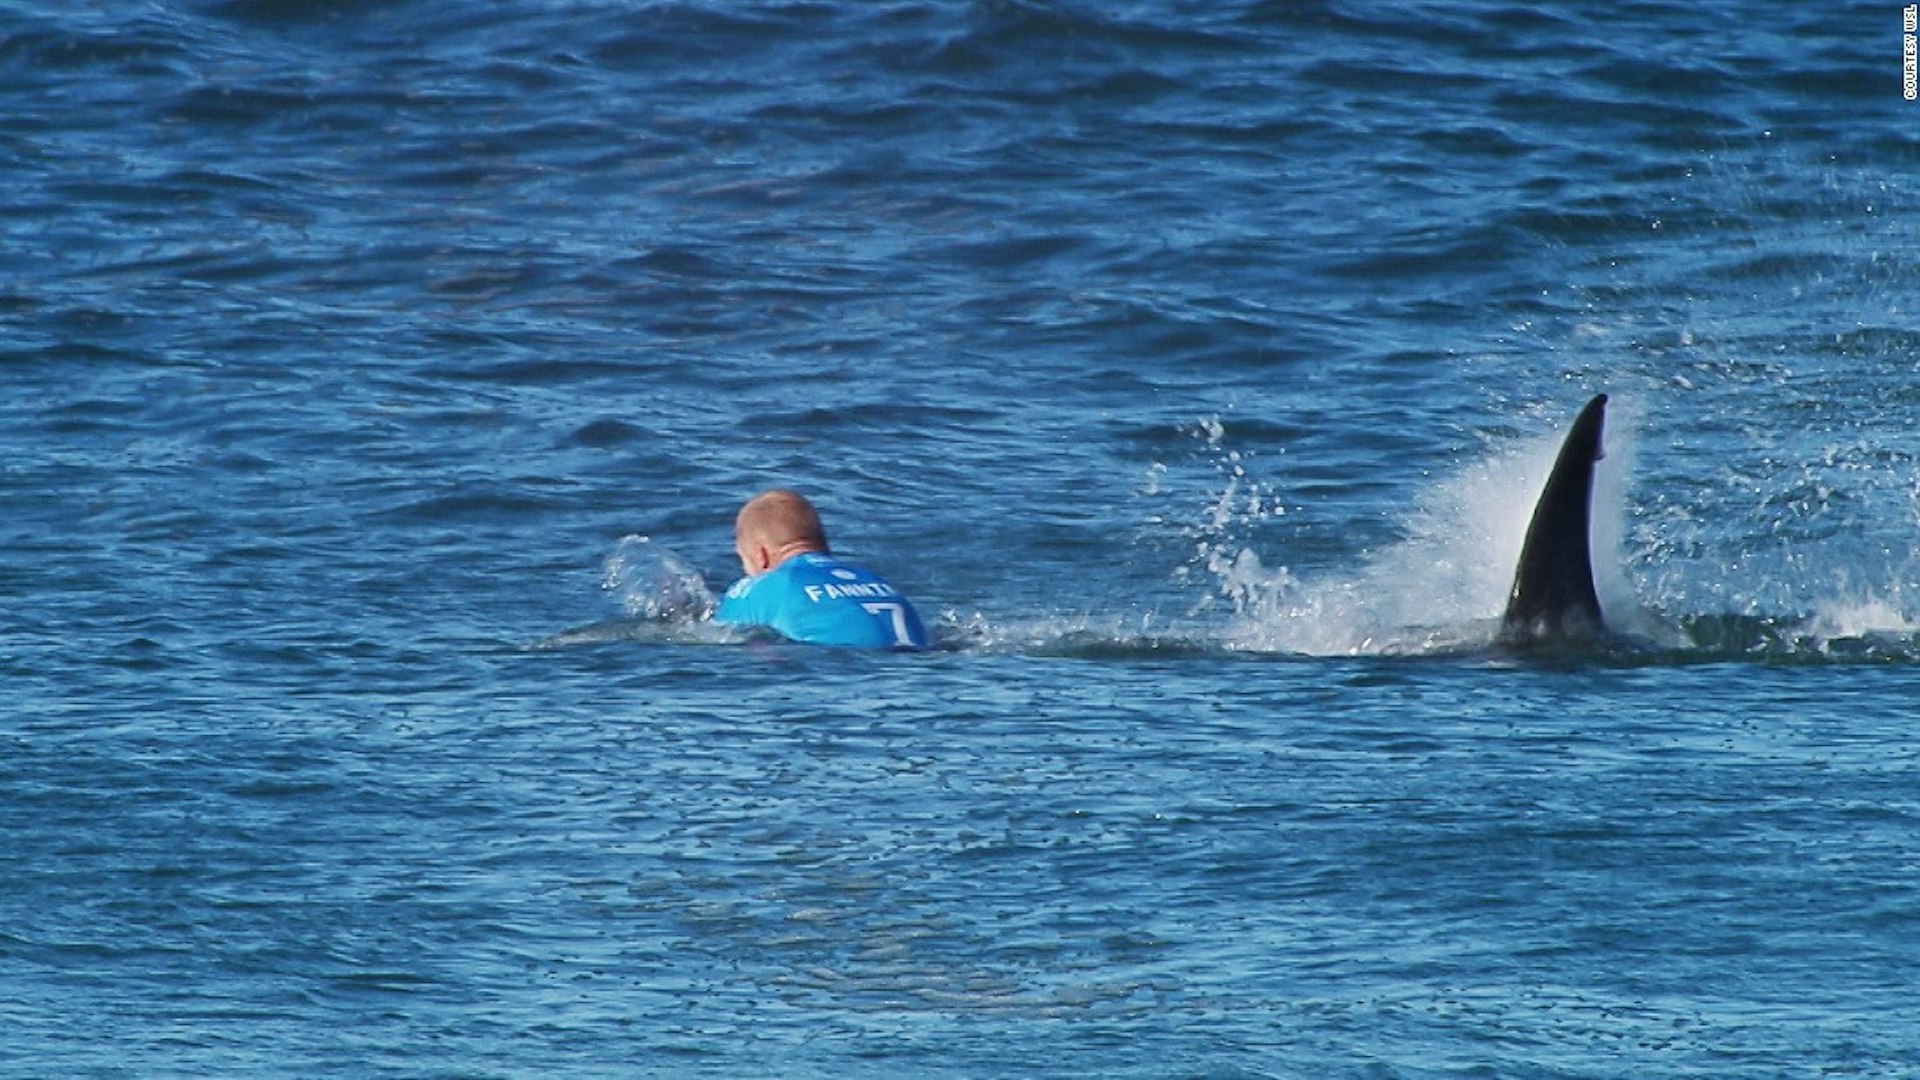 Shark attacks Mick Fanning during a surf comp. But do we have ourselves to blame?